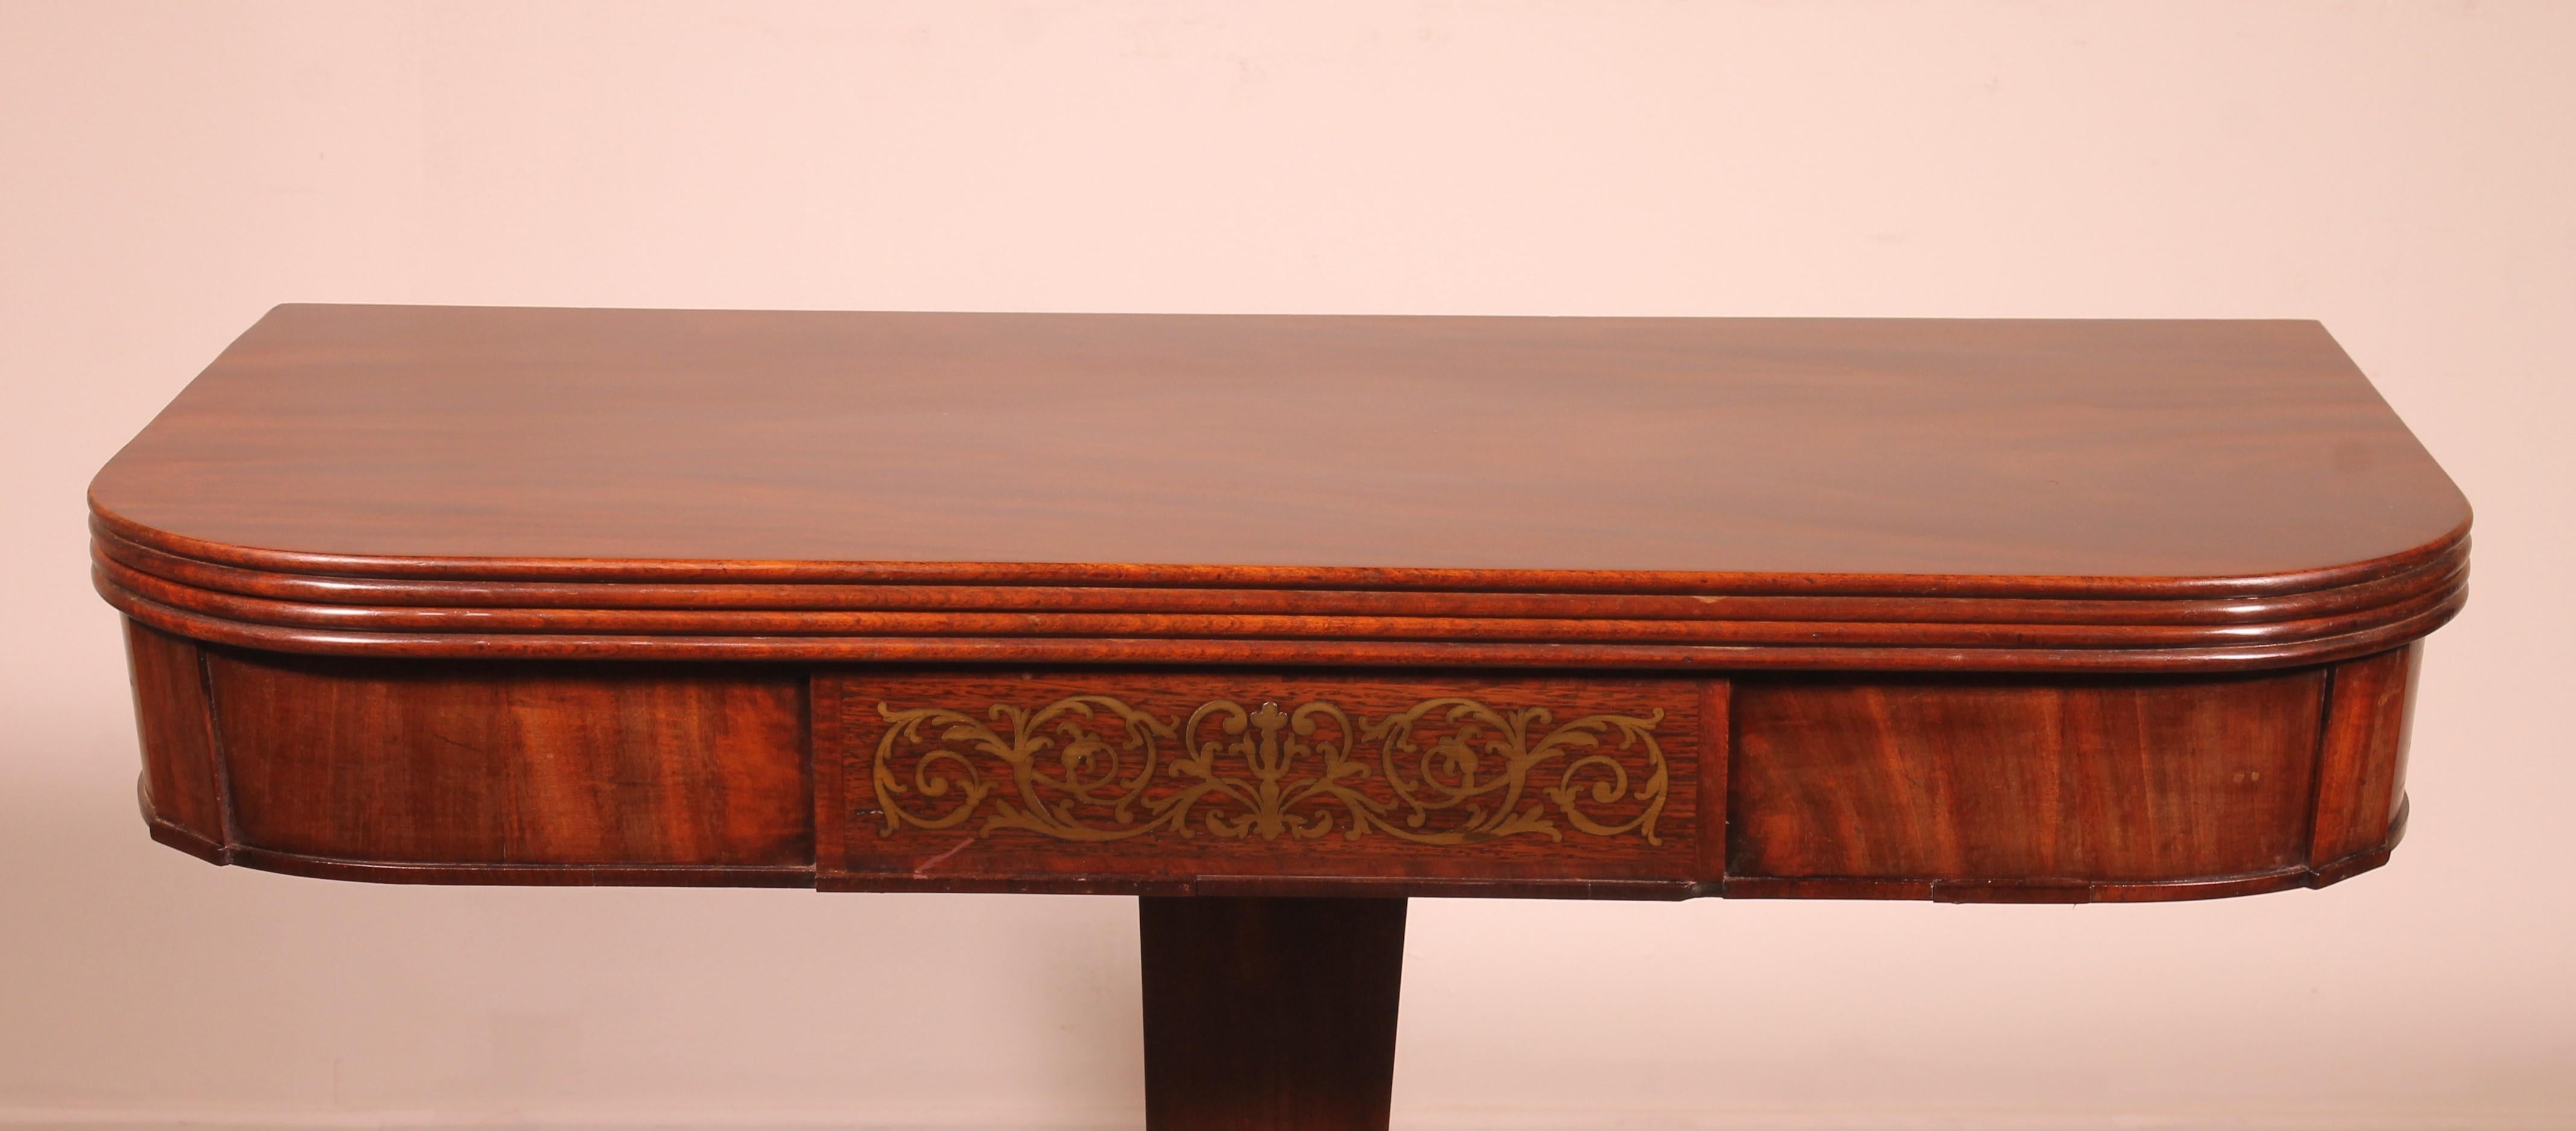 Elegant console or games table in mahogany from the regency period
very beautiful console which is decorated with brass on its belt which is unusual
Beautiful solid mahogany top with a beautiful flame
It is possible to open the table top and we can